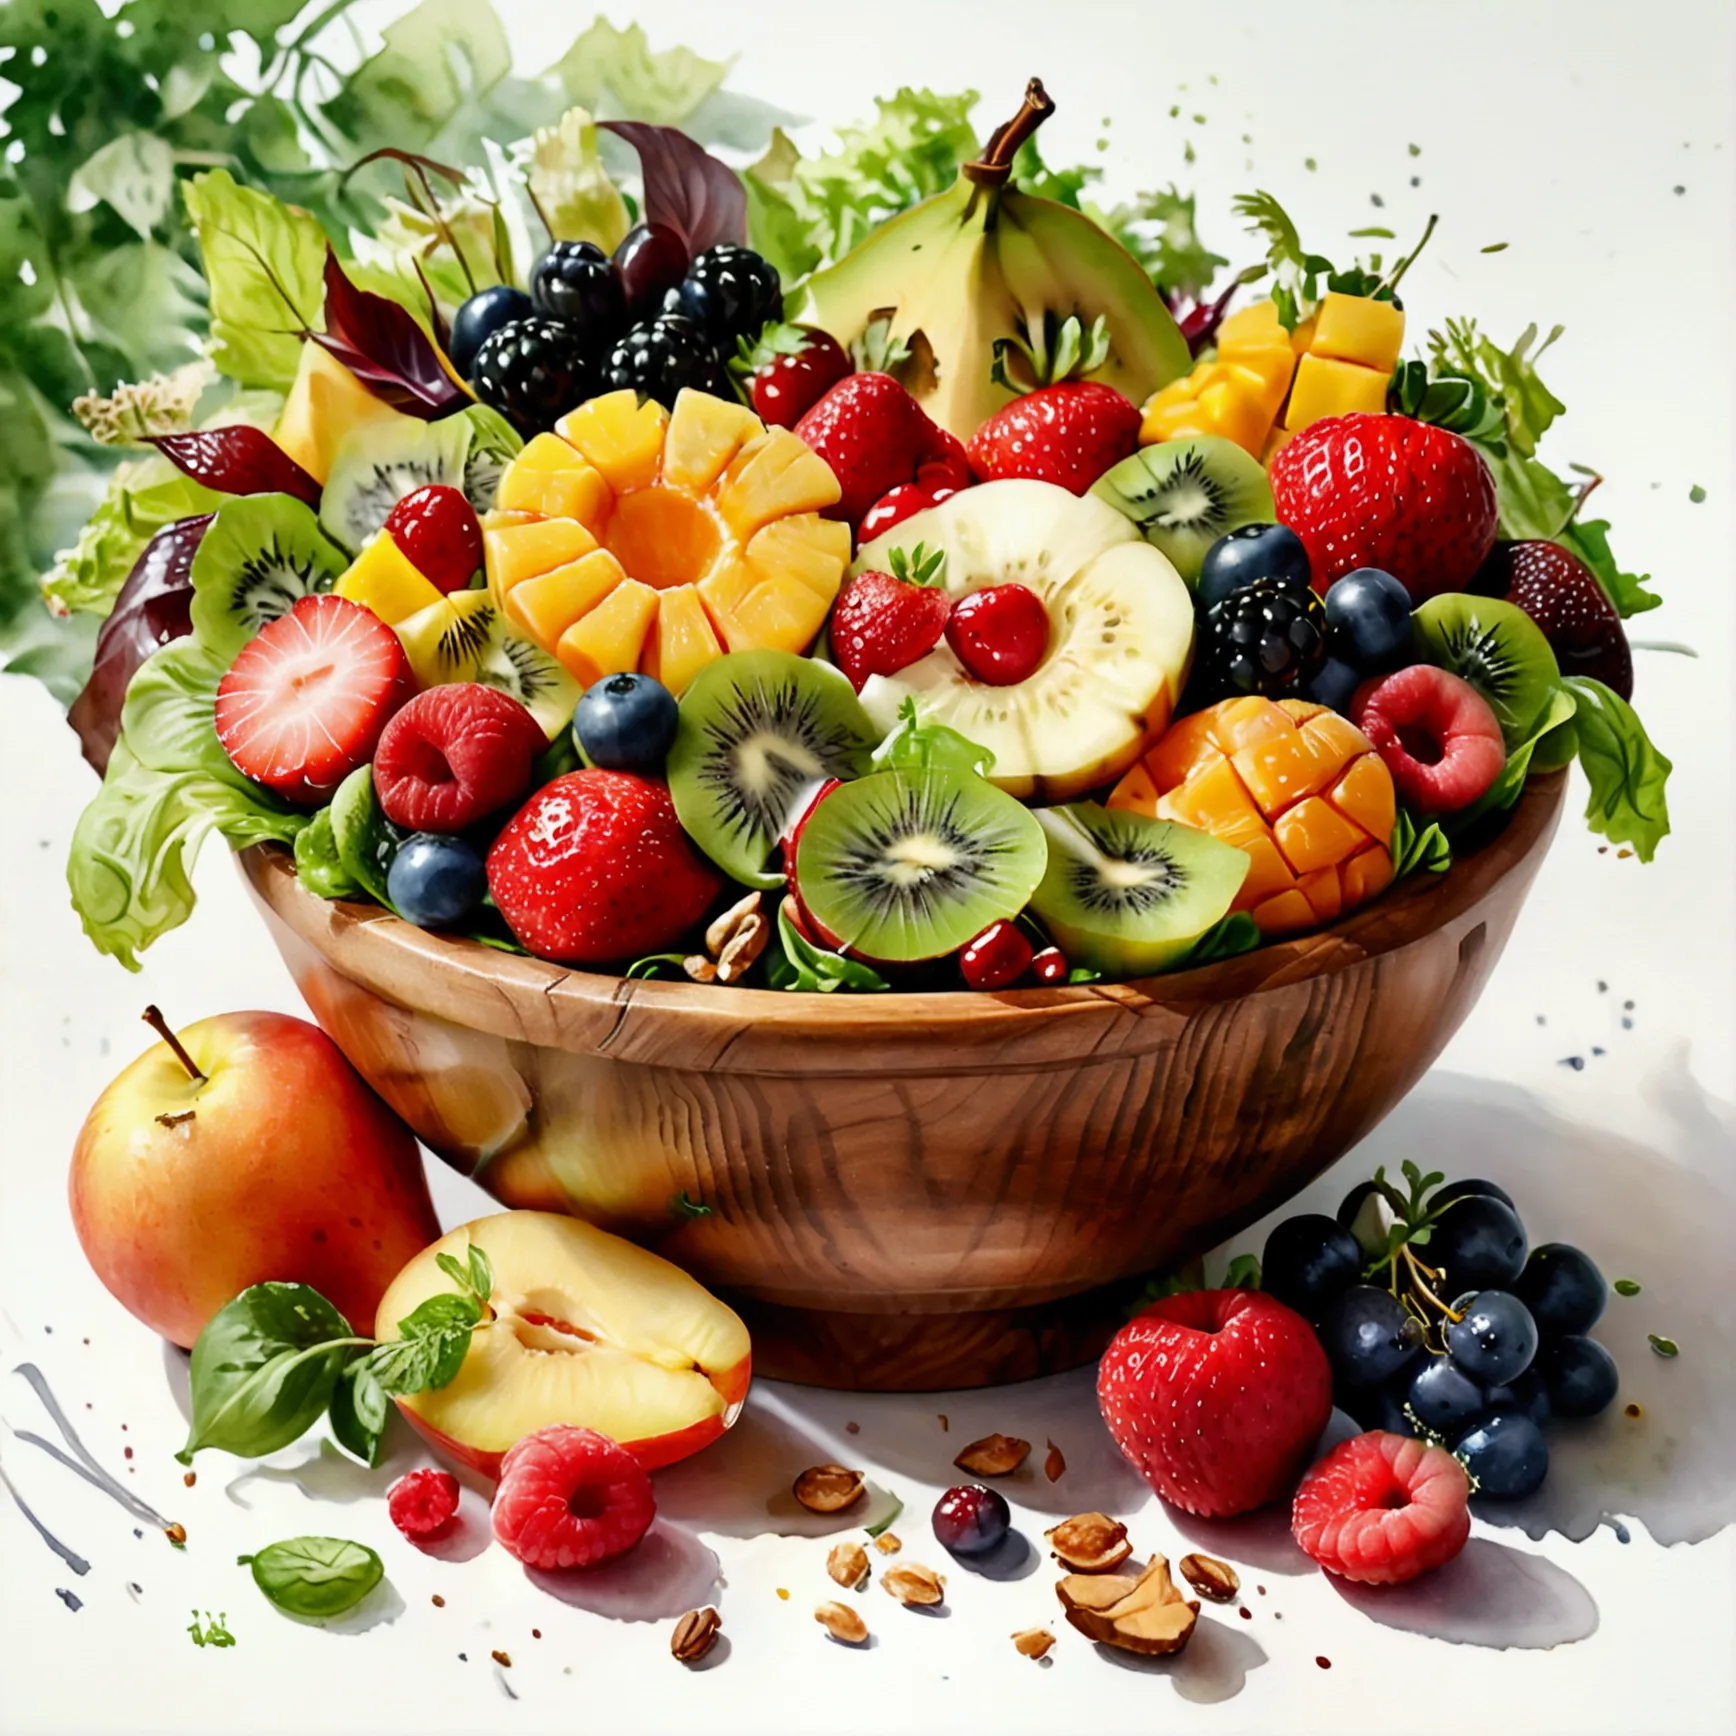 There is bowl of salad made of different fruit , fresh and creamy, served in fancy wooden bowl, illustration, baking ingredients...